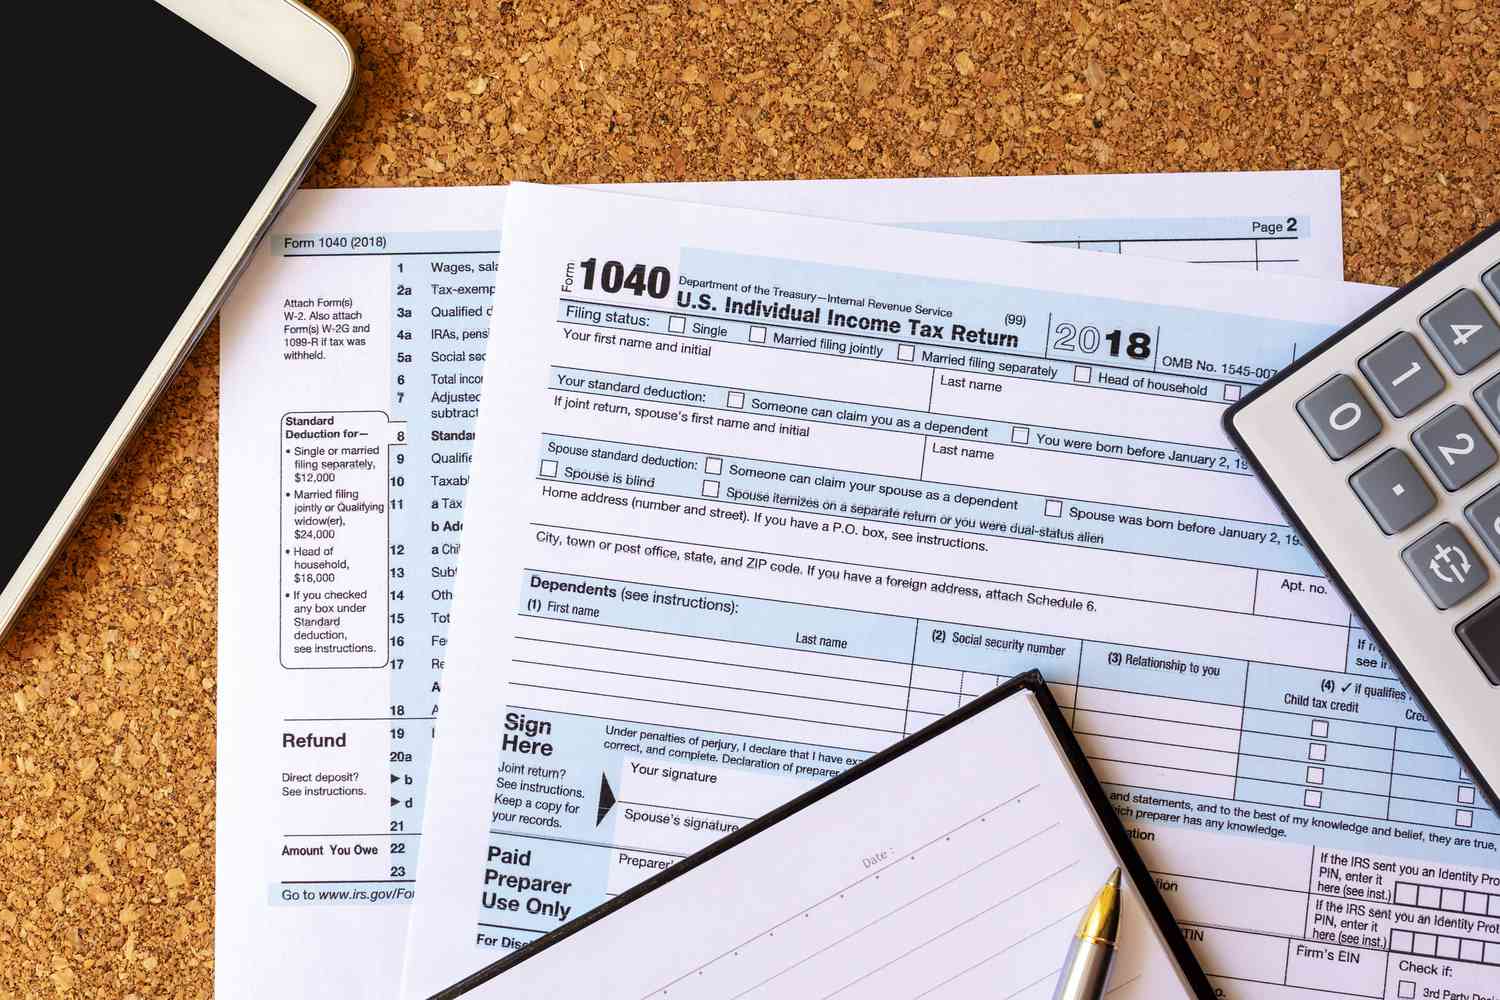 What Is A Notice Of Deficiency From The IRS?